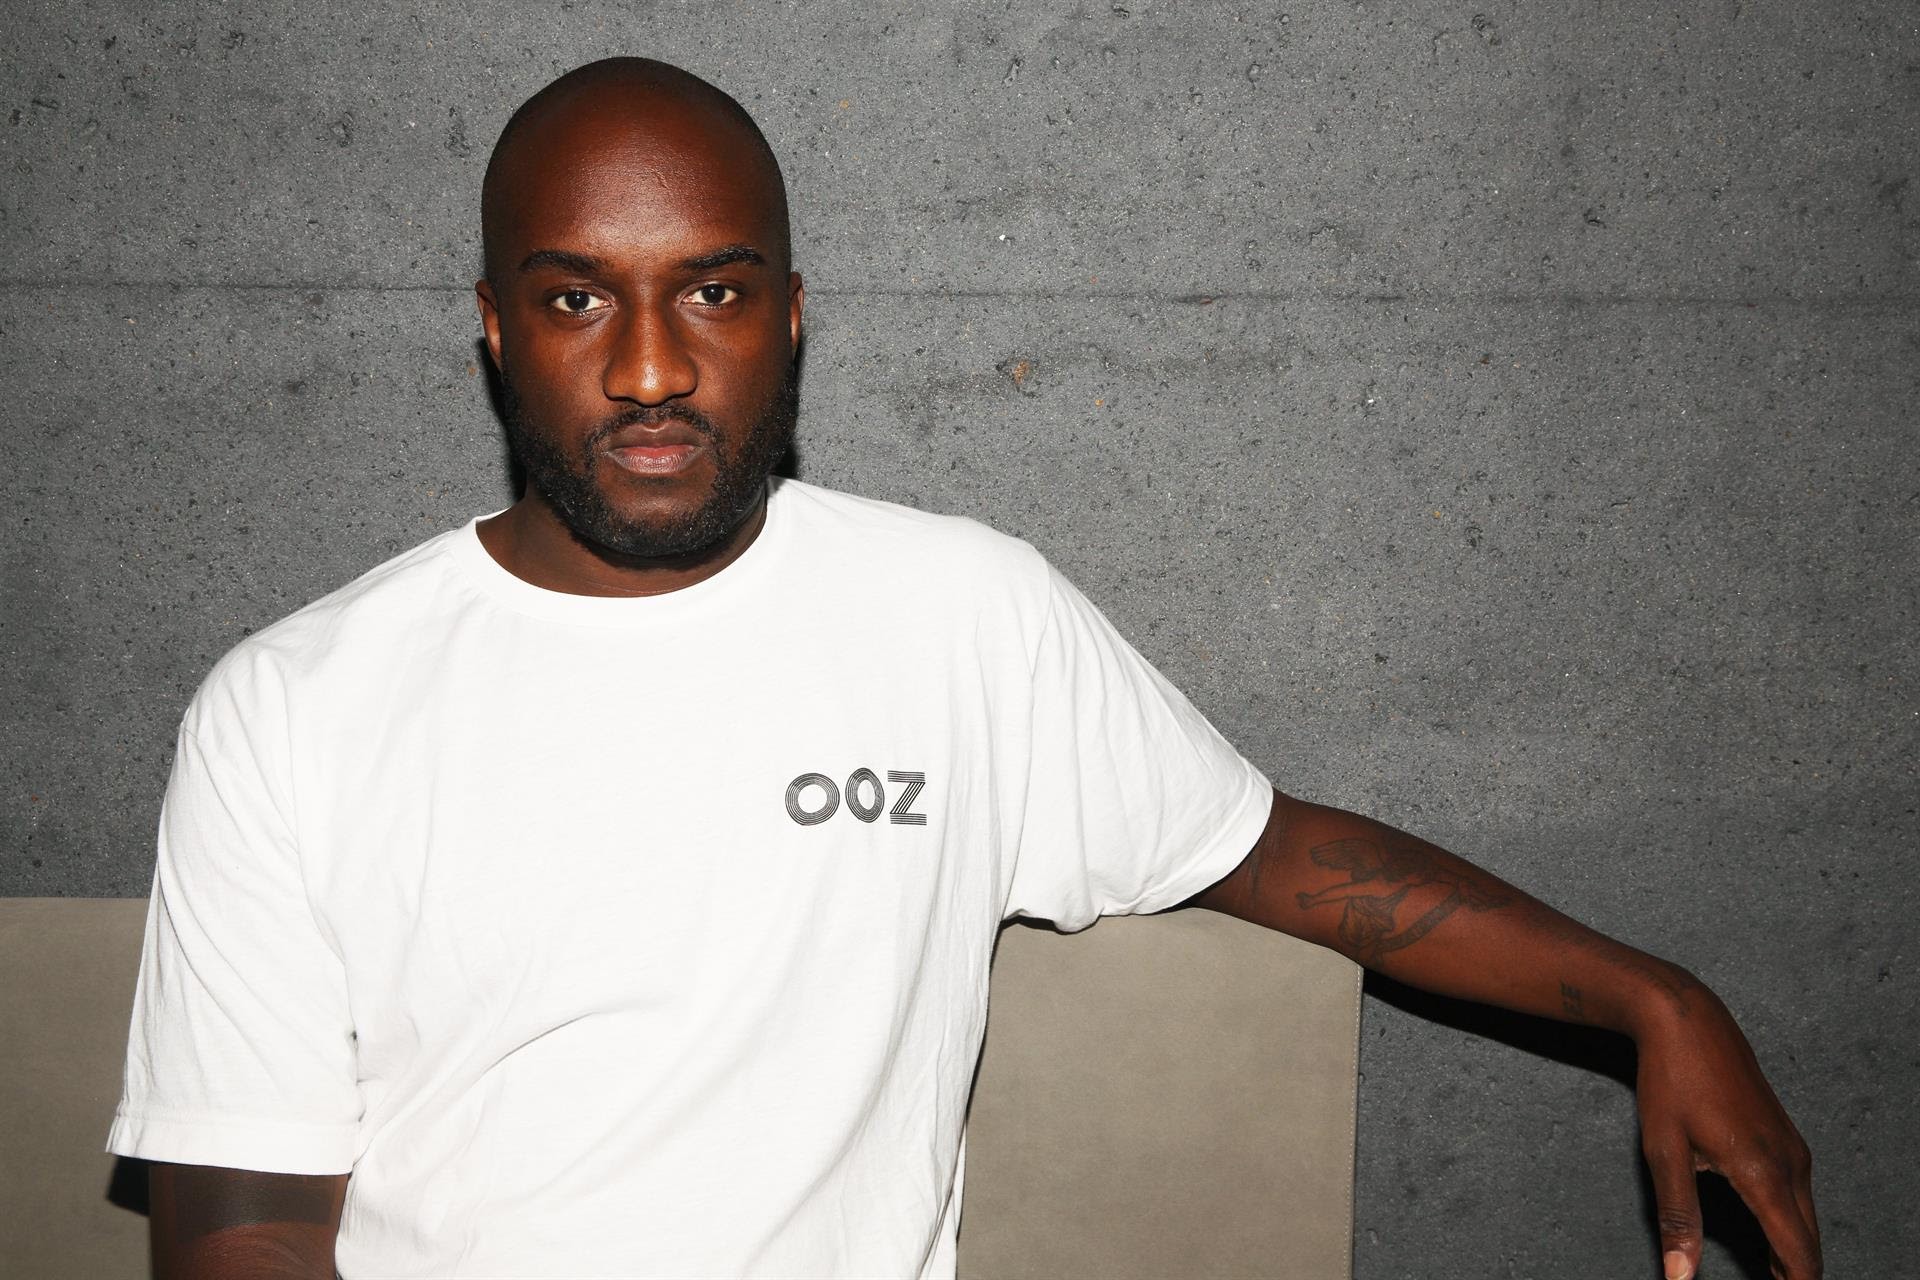 Seamless Source on X: The late Virgil Abloh was an American fashion  designer. He was the artistic director of Louis Vuitton's menswear and the  founder of Off-White. #quoteoftheday #virgilabloh #offwhite #louisvuitton # virgil #